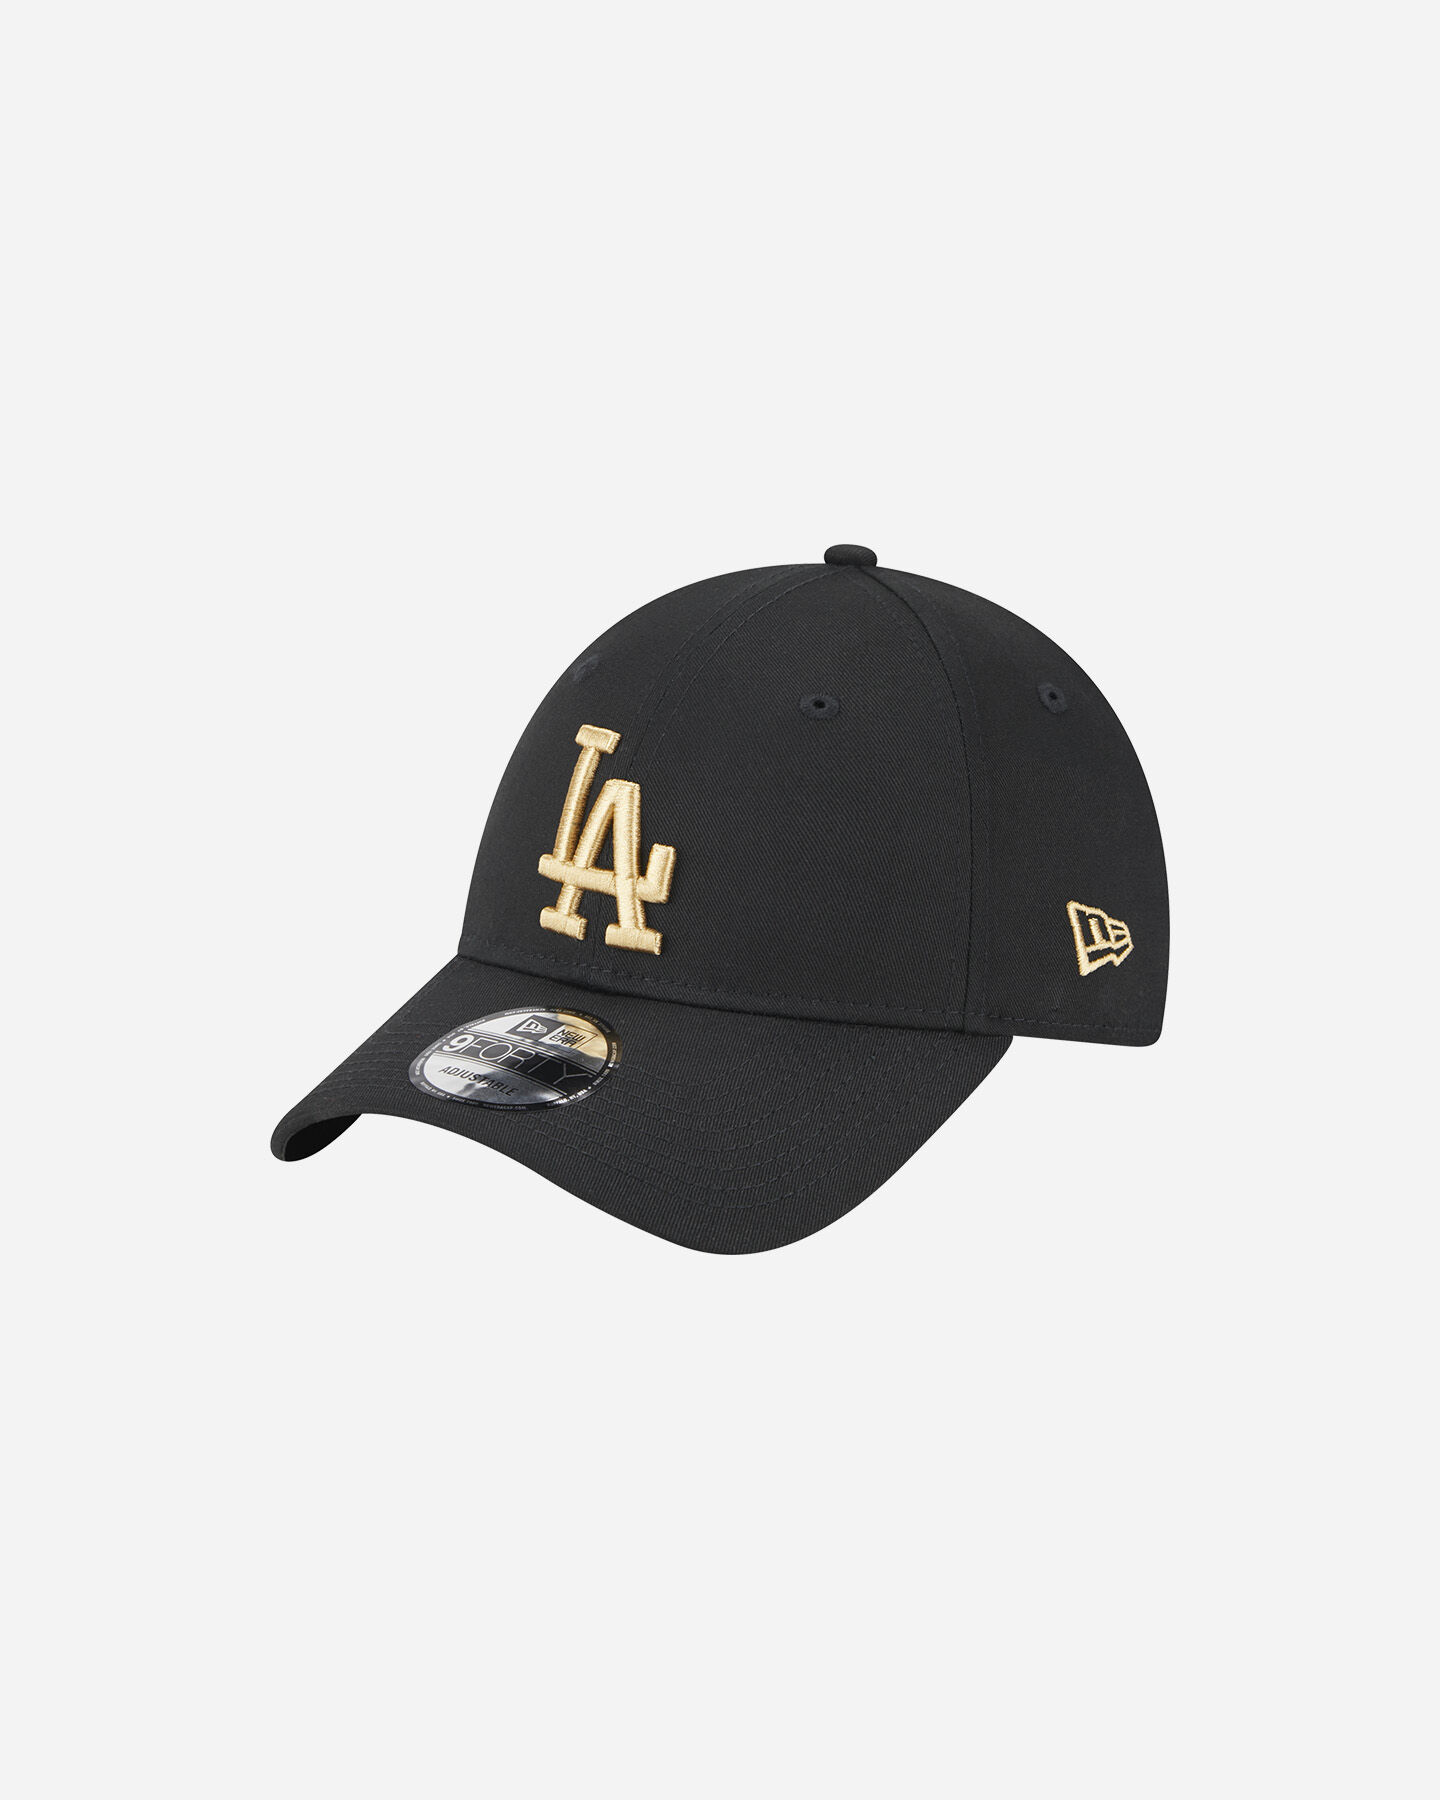  Cappellino NEW ERA 9FORTY MLB LEAGUE LOS ANGELES DODGERS  S5630967|001|OSFM scatto 0